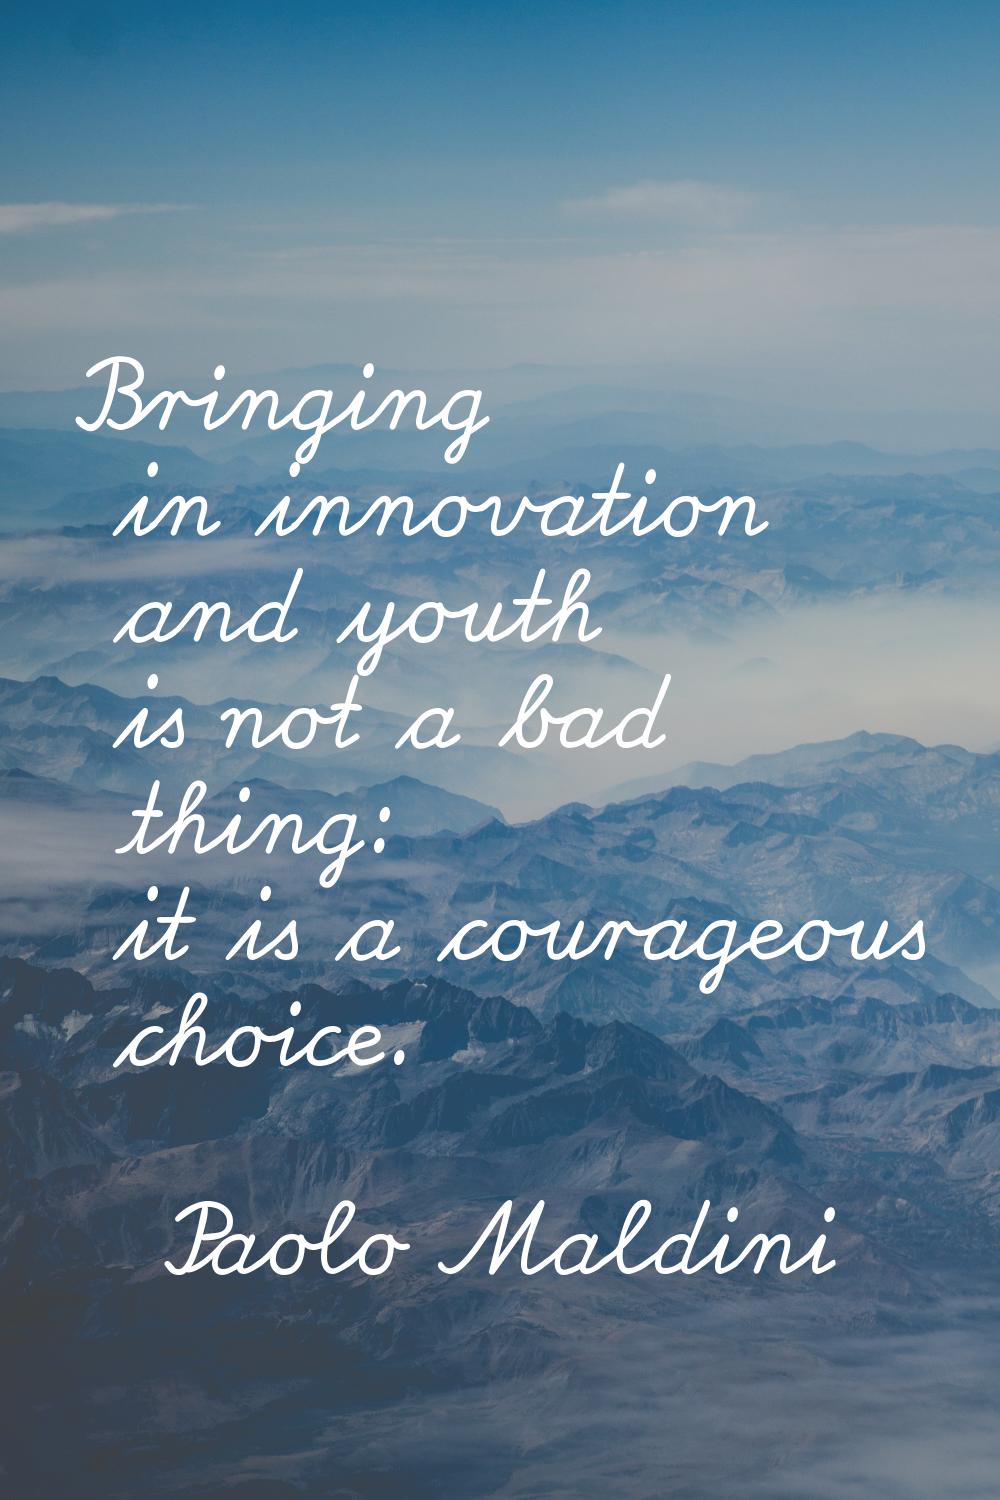 Bringing in innovation and youth is not a bad thing: it is a courageous choice.